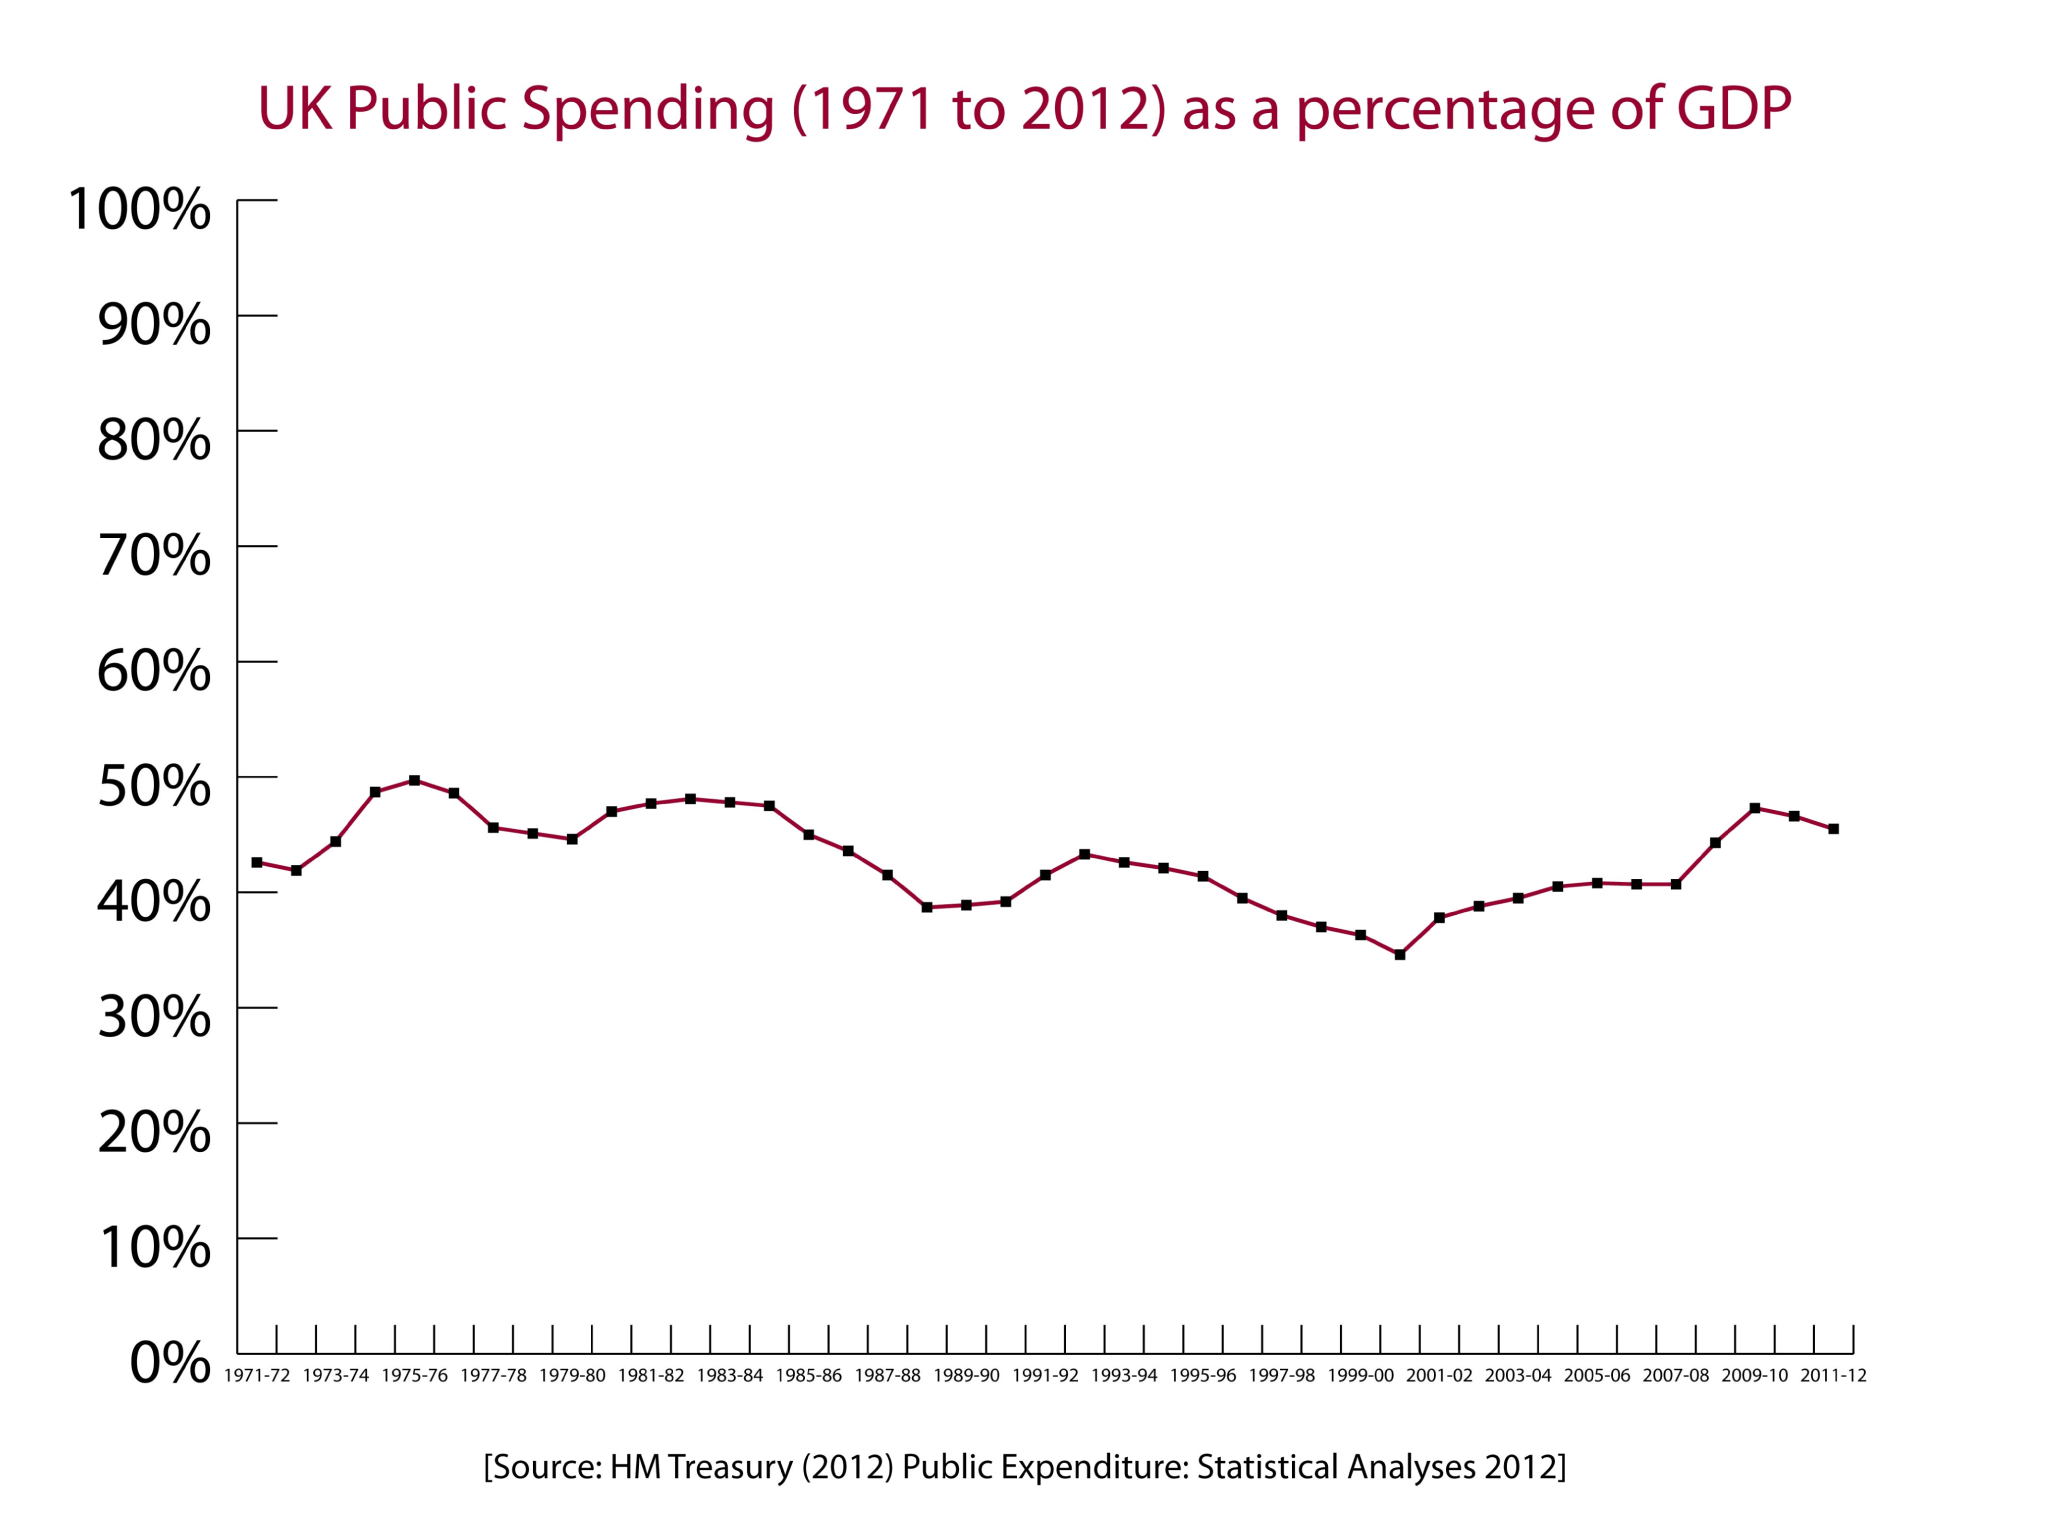 UK Public Expenditure as a percentage of GDP